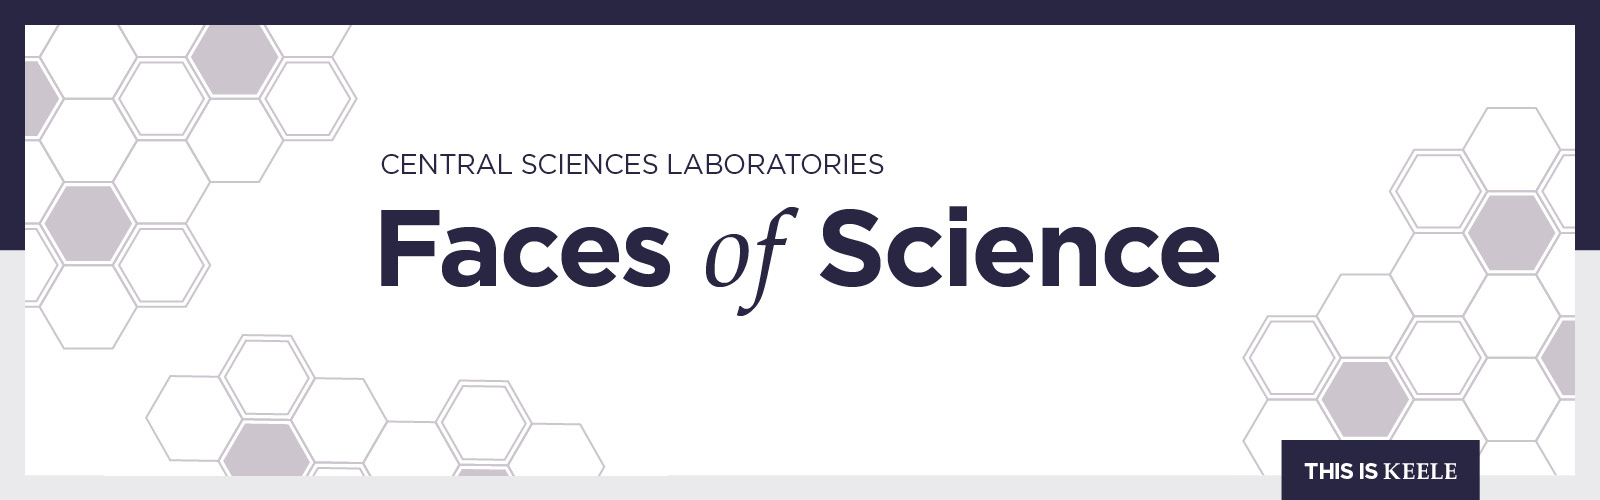 Faces of science banner